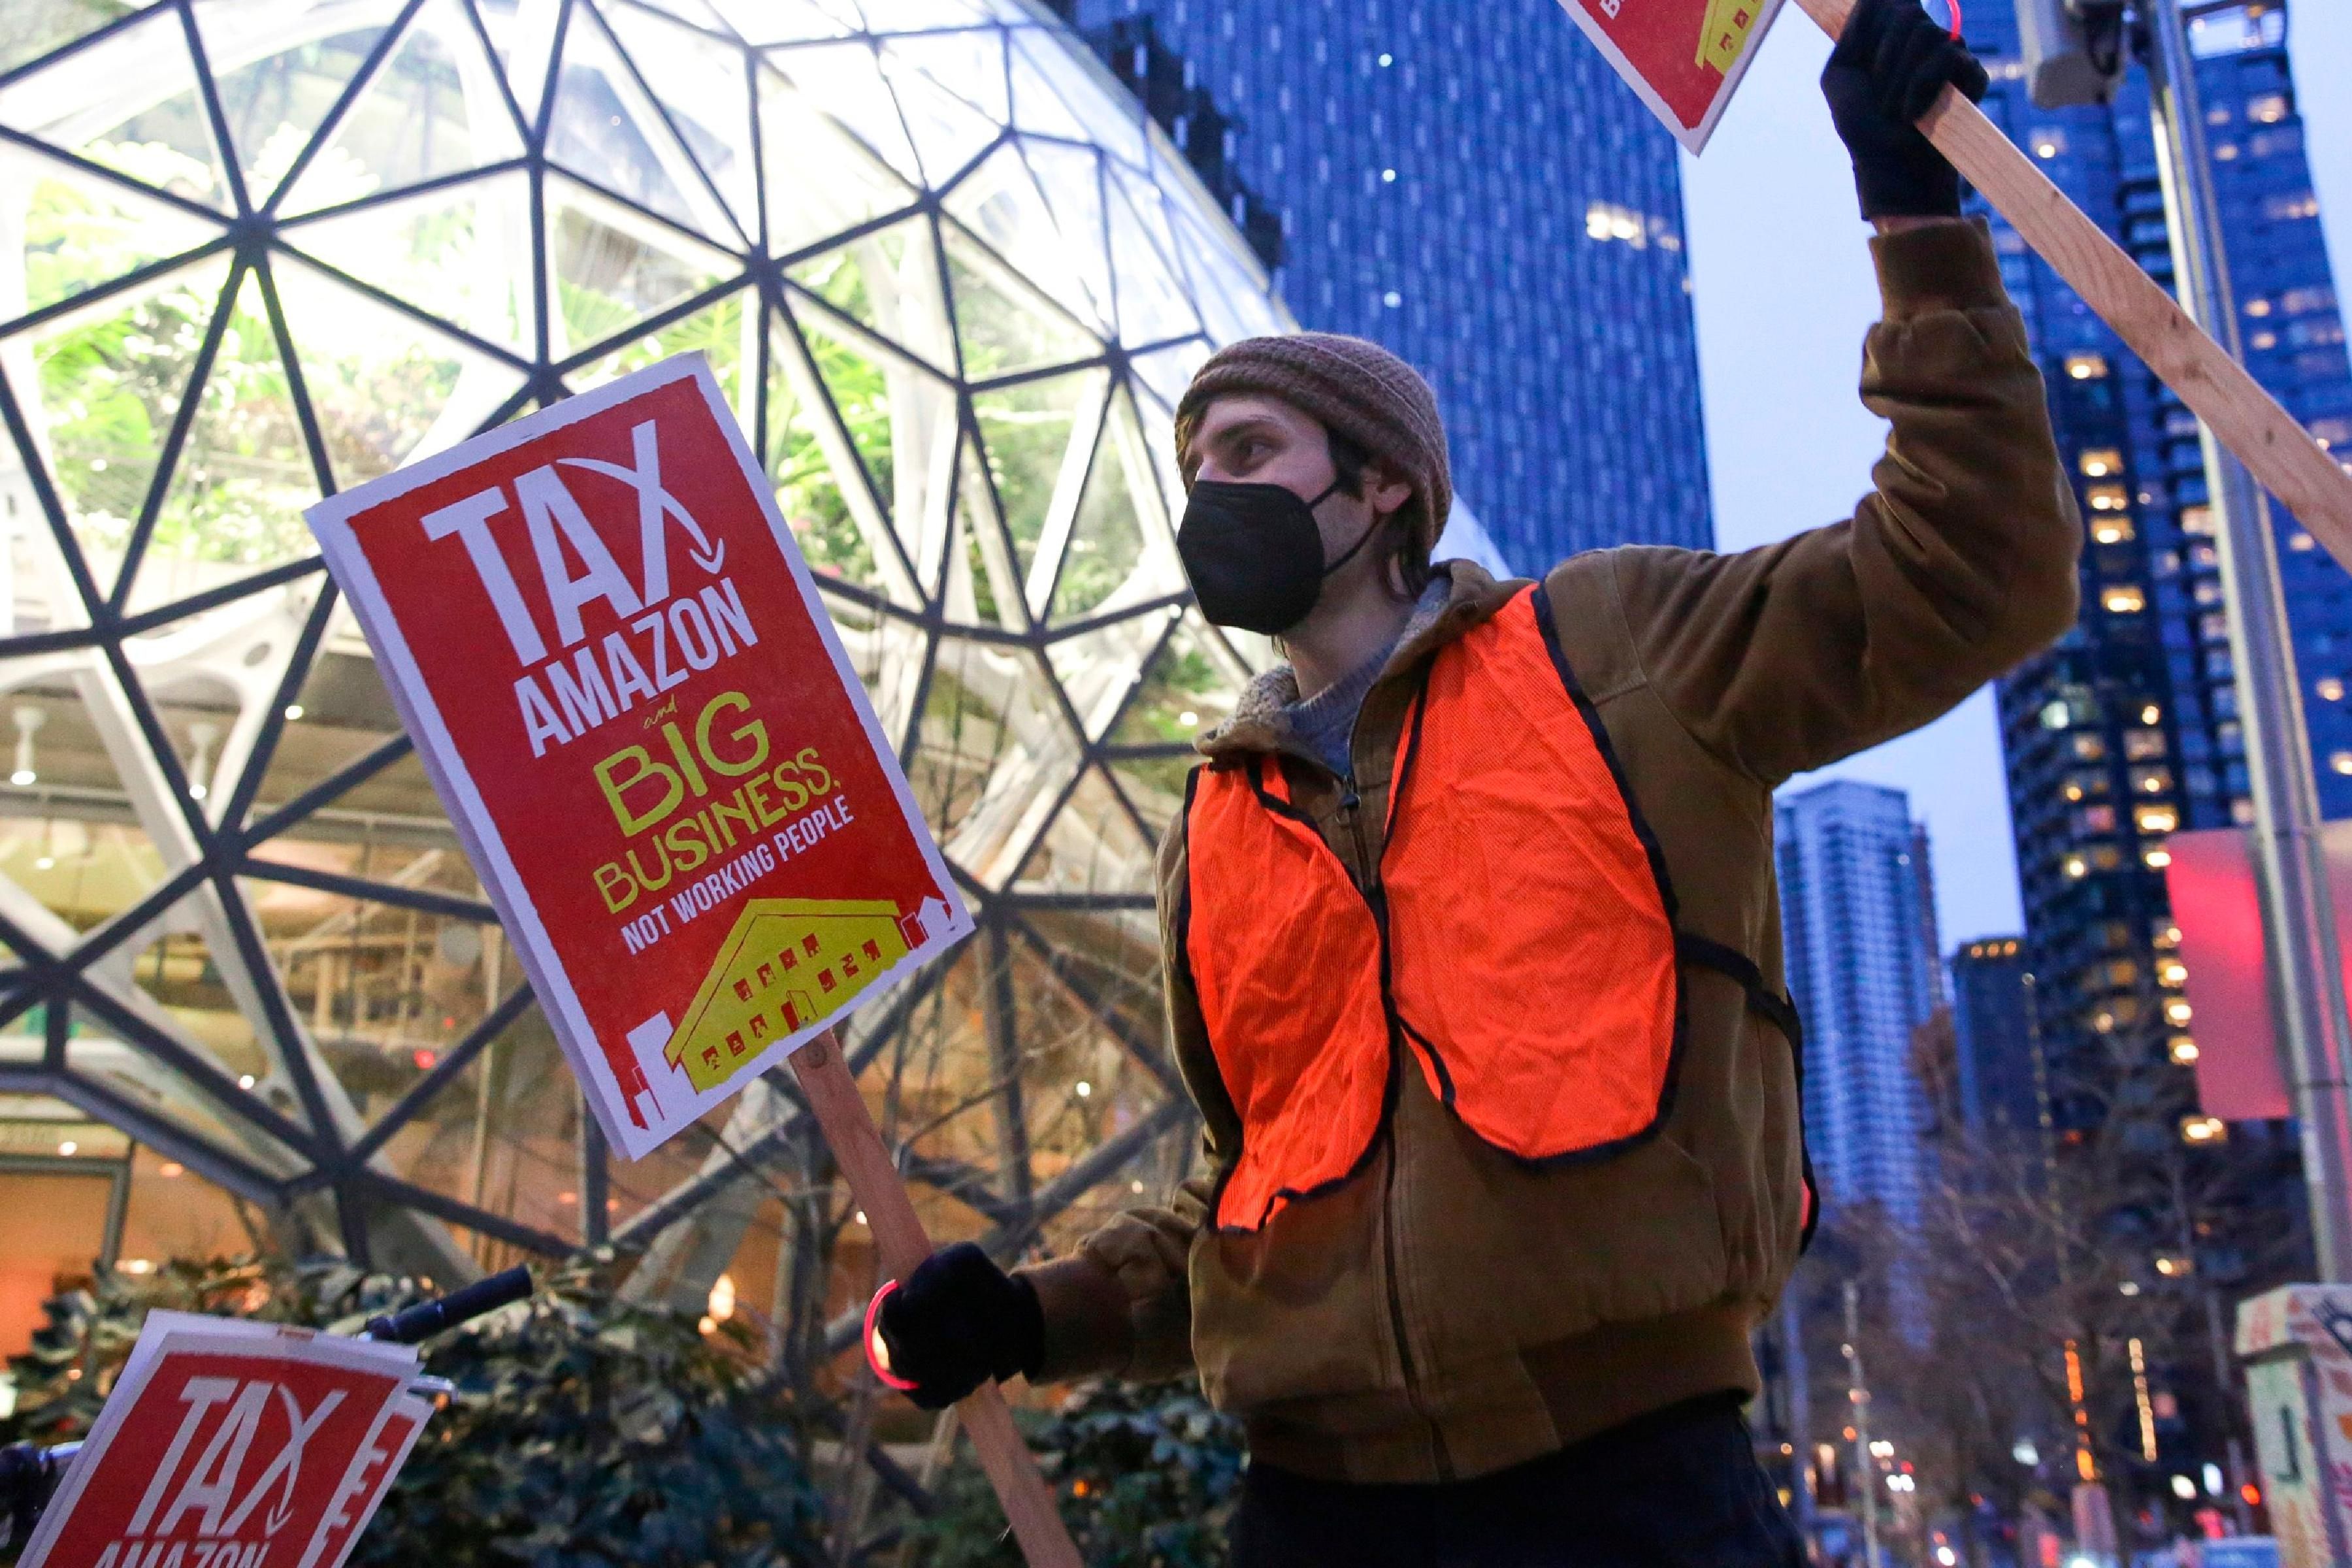 Demonstrators take part in a Tax Amazon protest